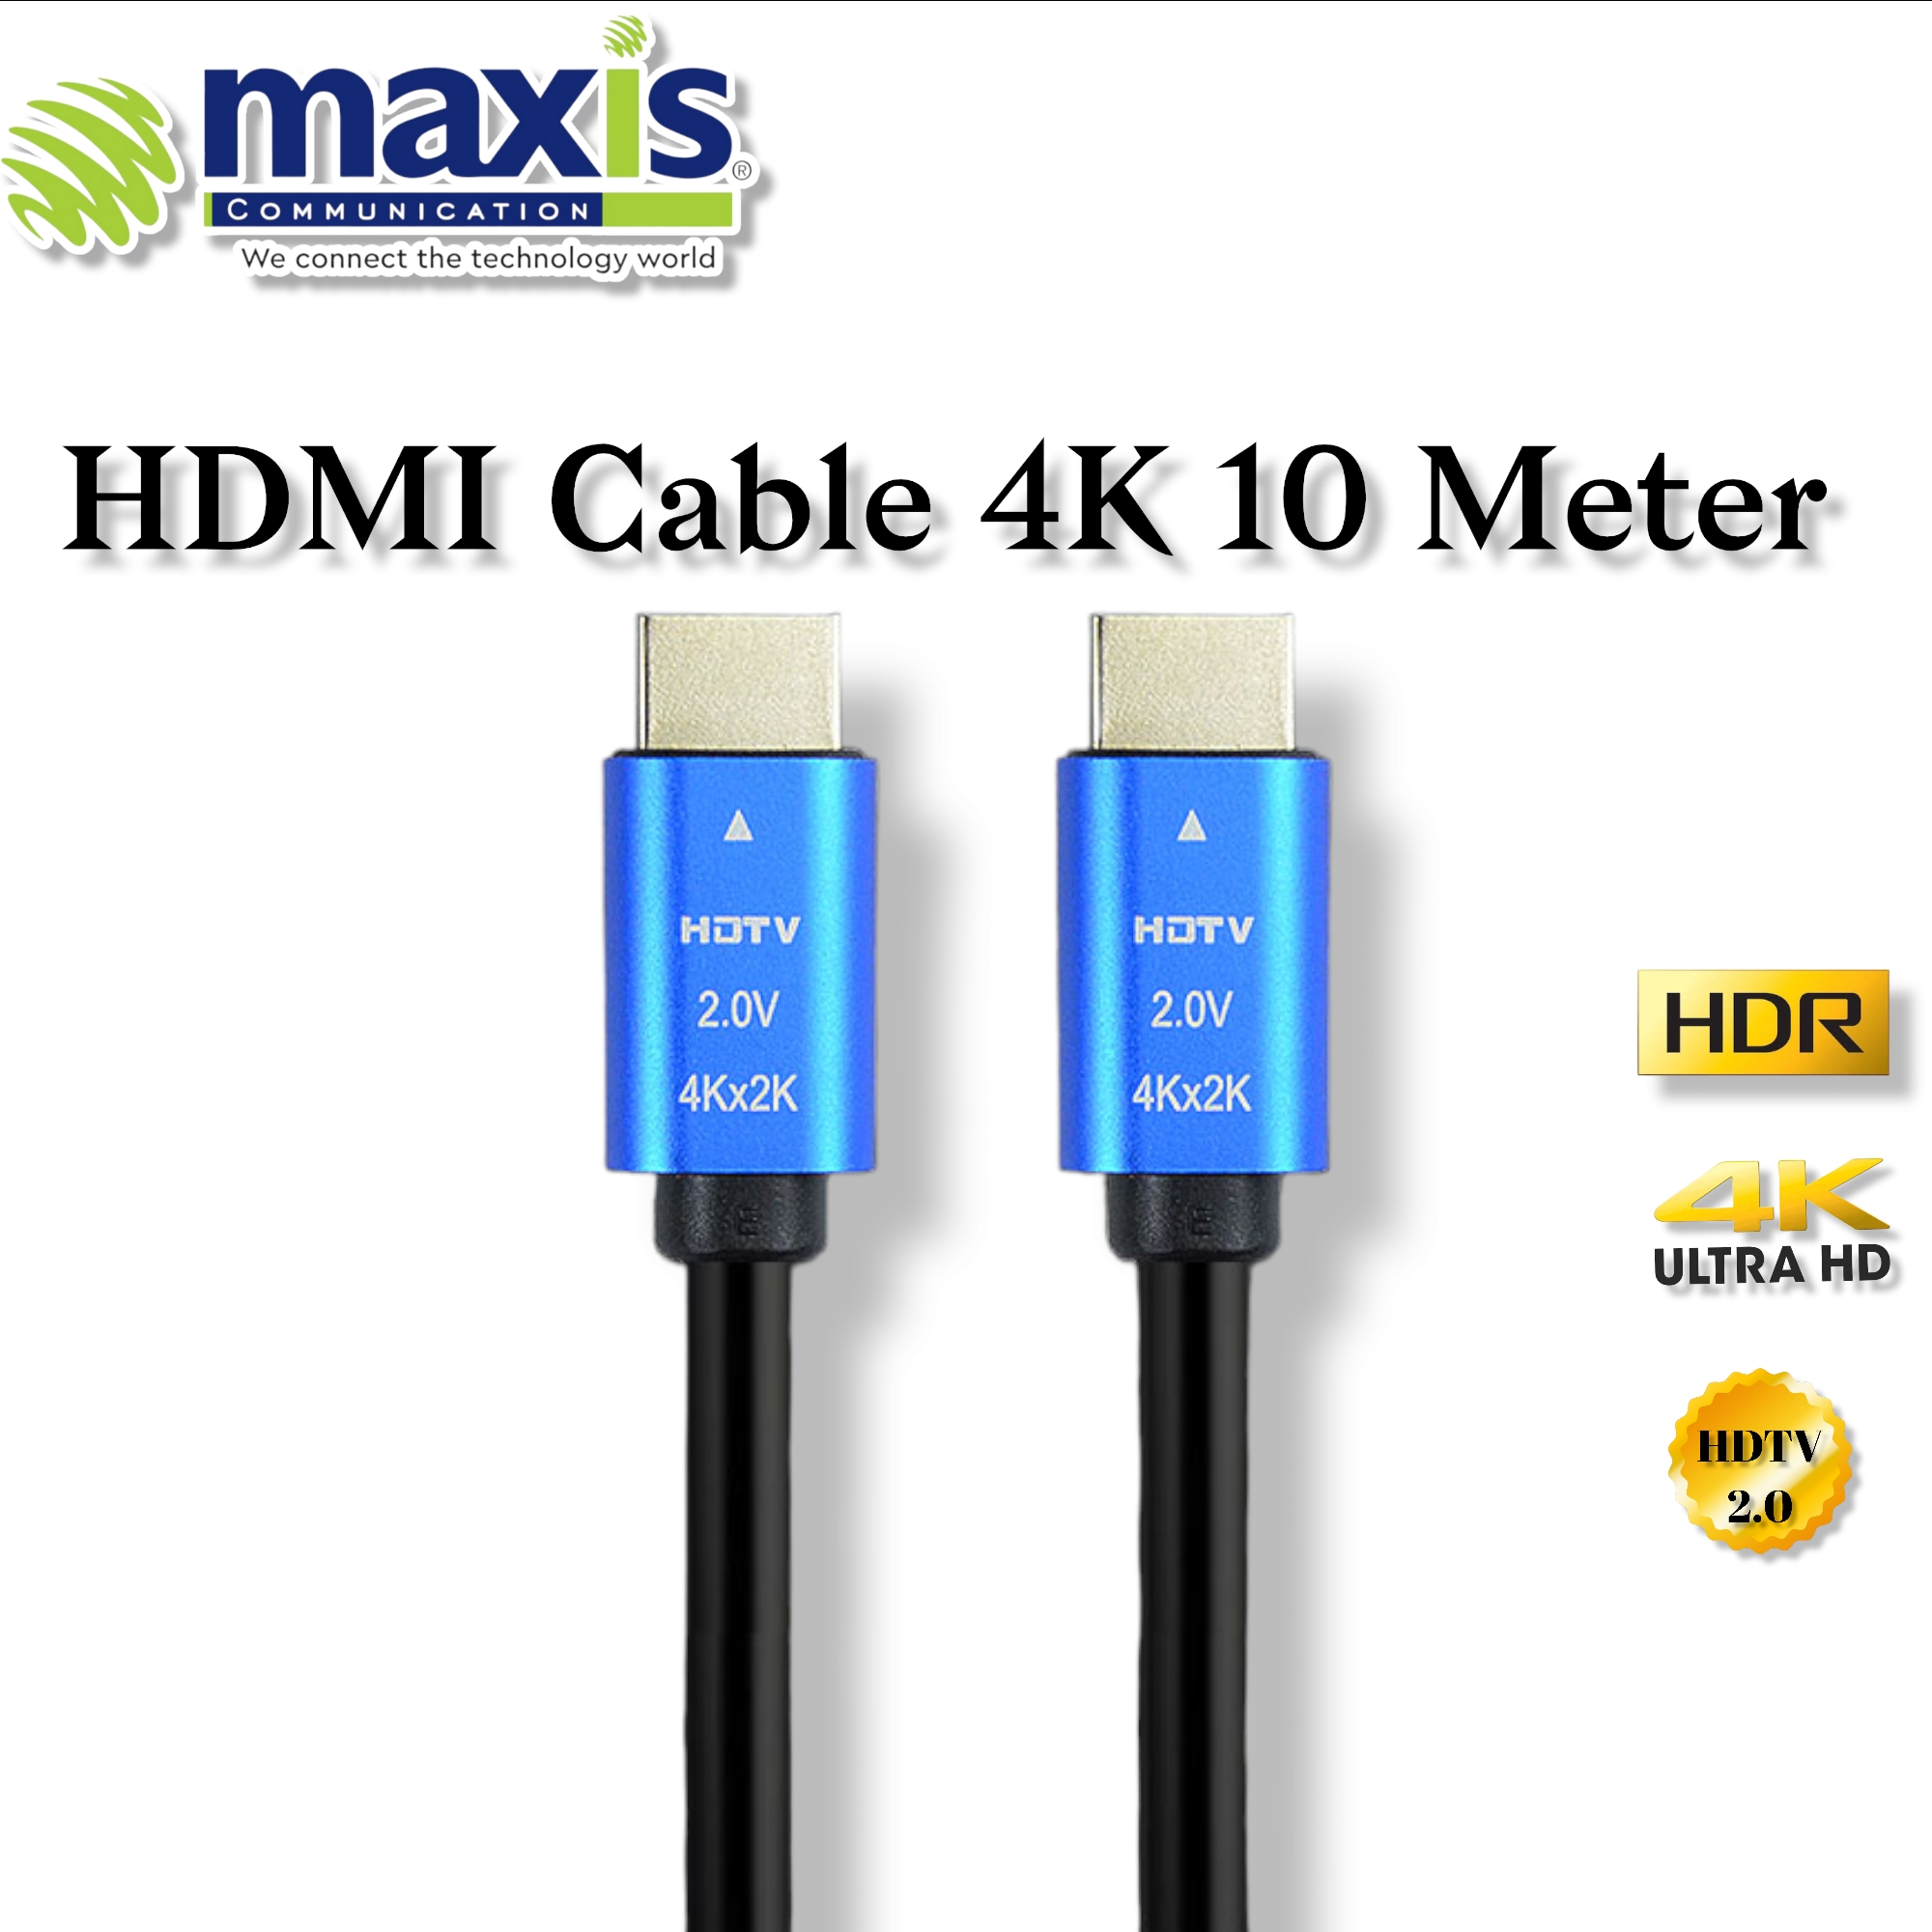 product.php?id=FISCO 2.0v HDM Premium Cable Ultra Hd 4k 10m